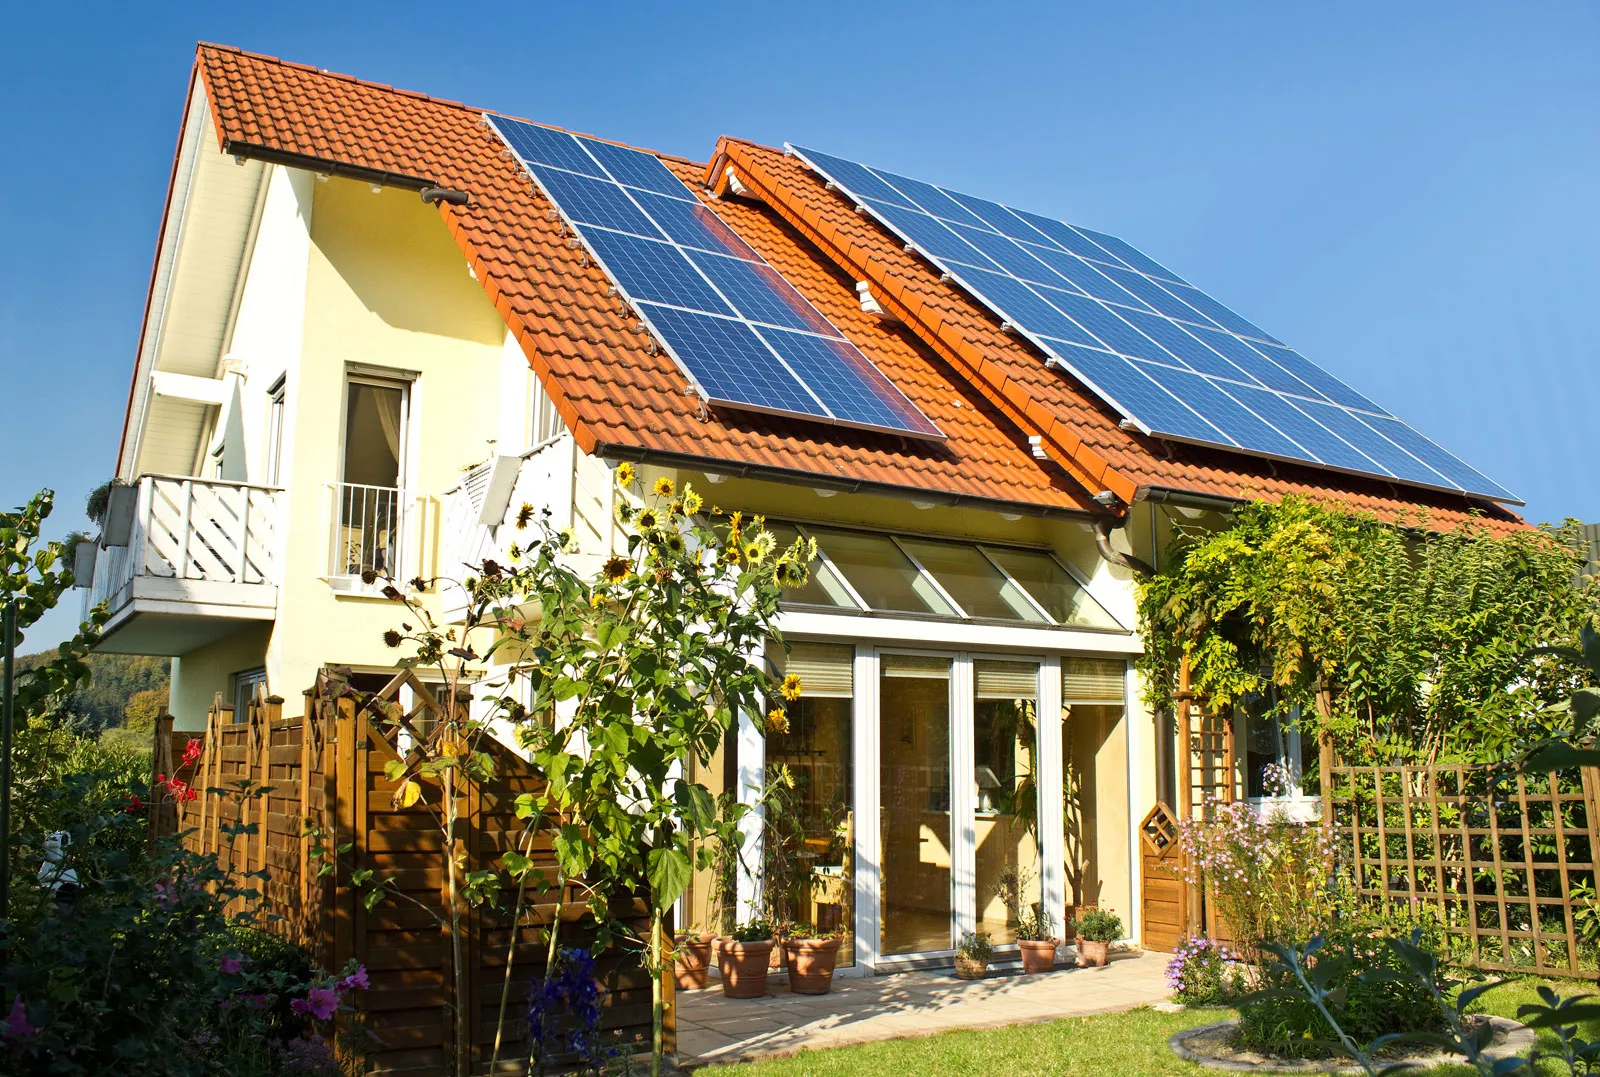 Investment Returns for Homeowners with Solar Power